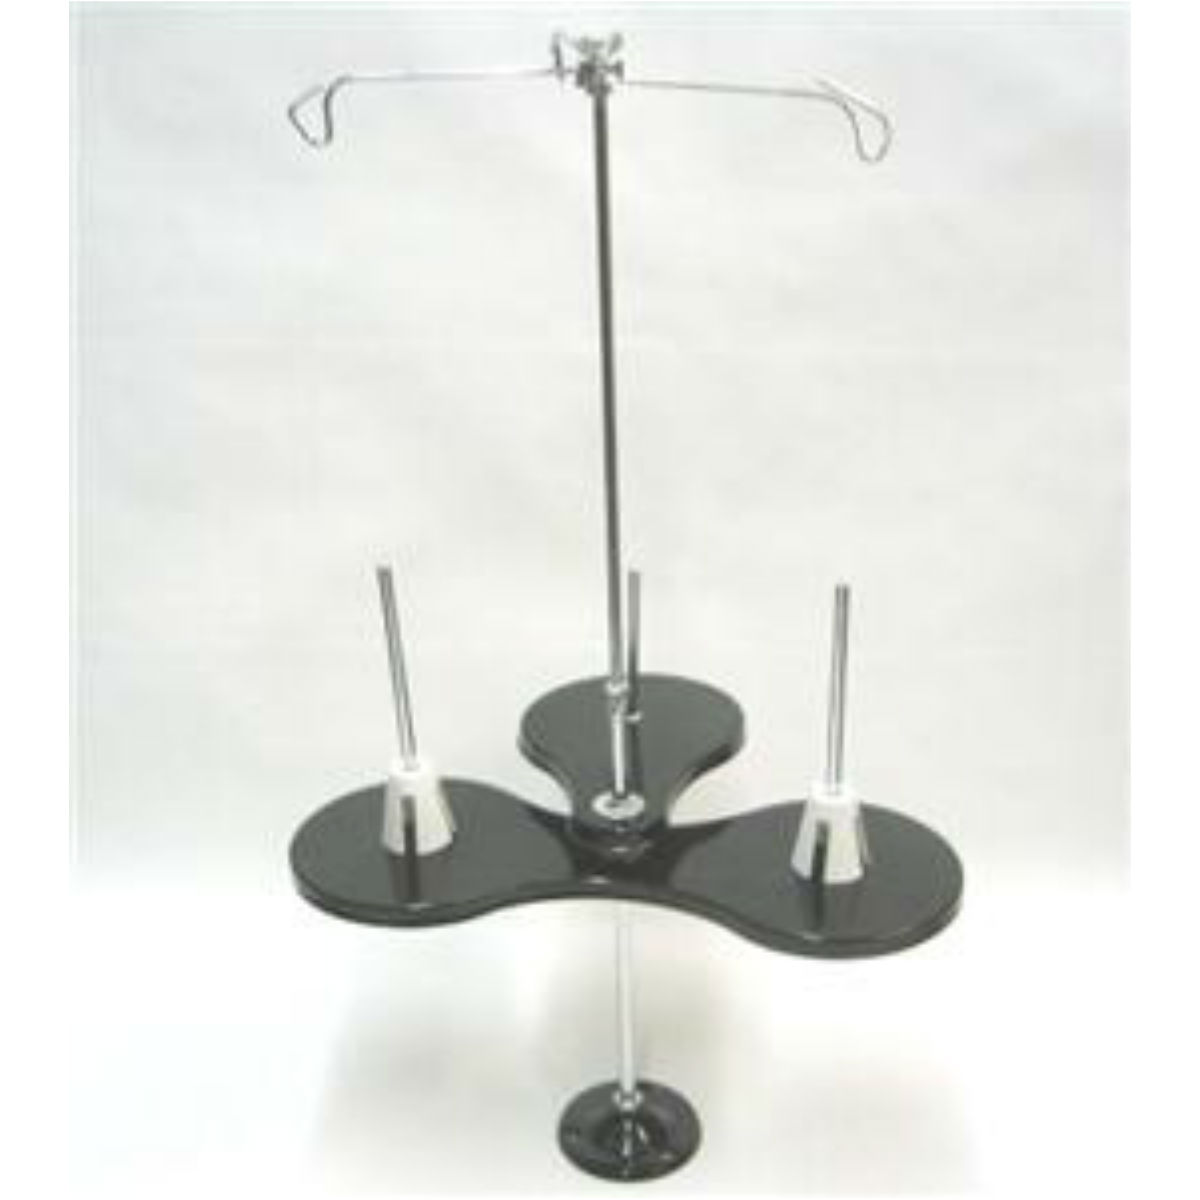 3 Spool thread stand - Stanley Sewing Industrial Sewing Machines